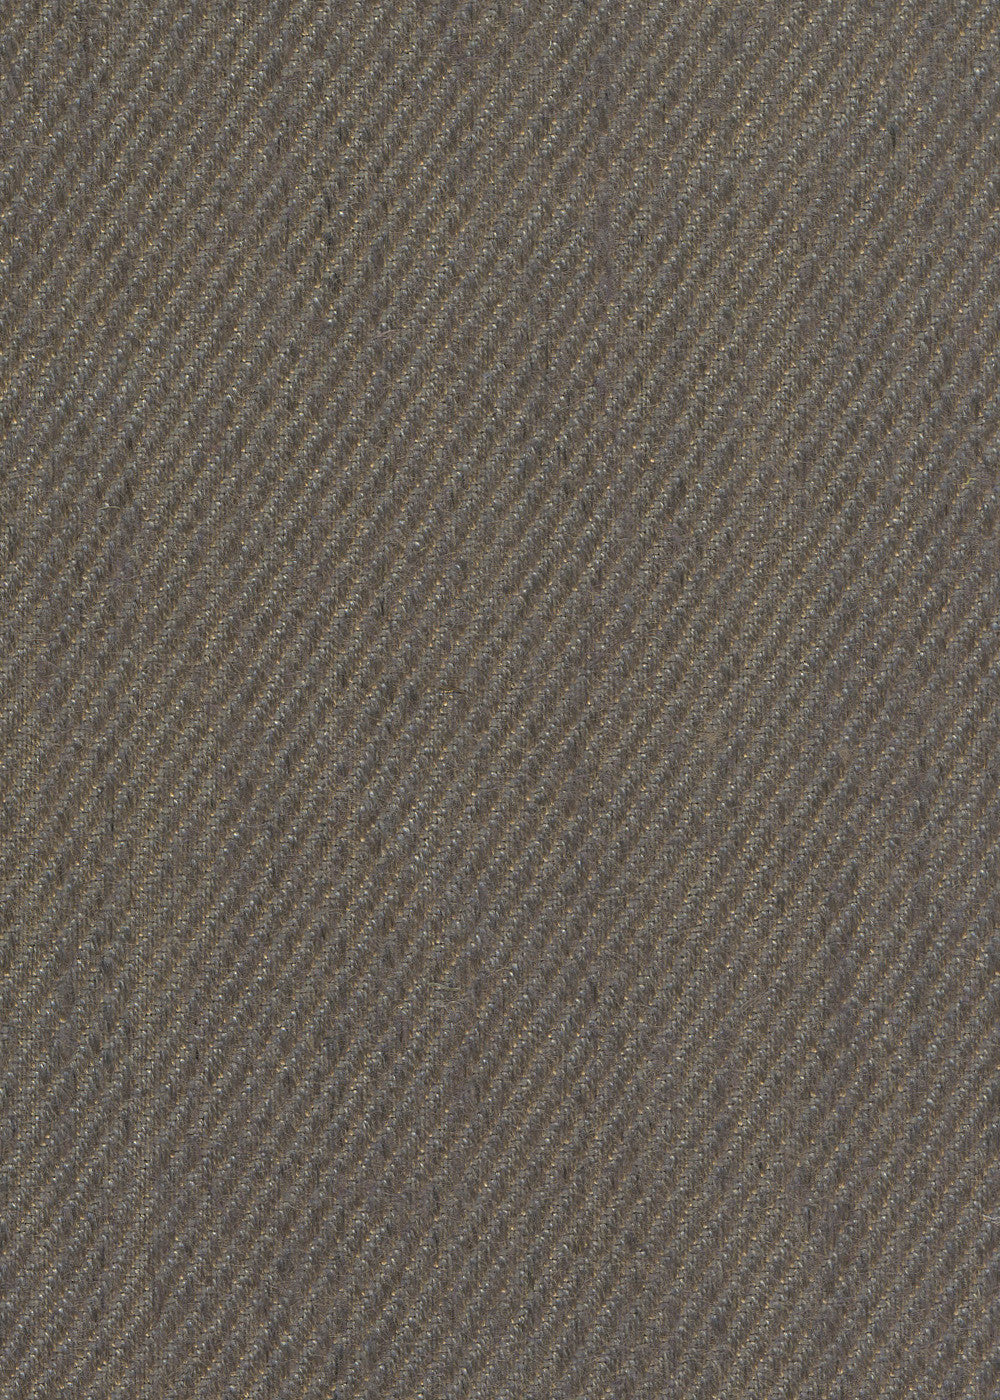 close up of a twill upholstery fabric in dark charcoal